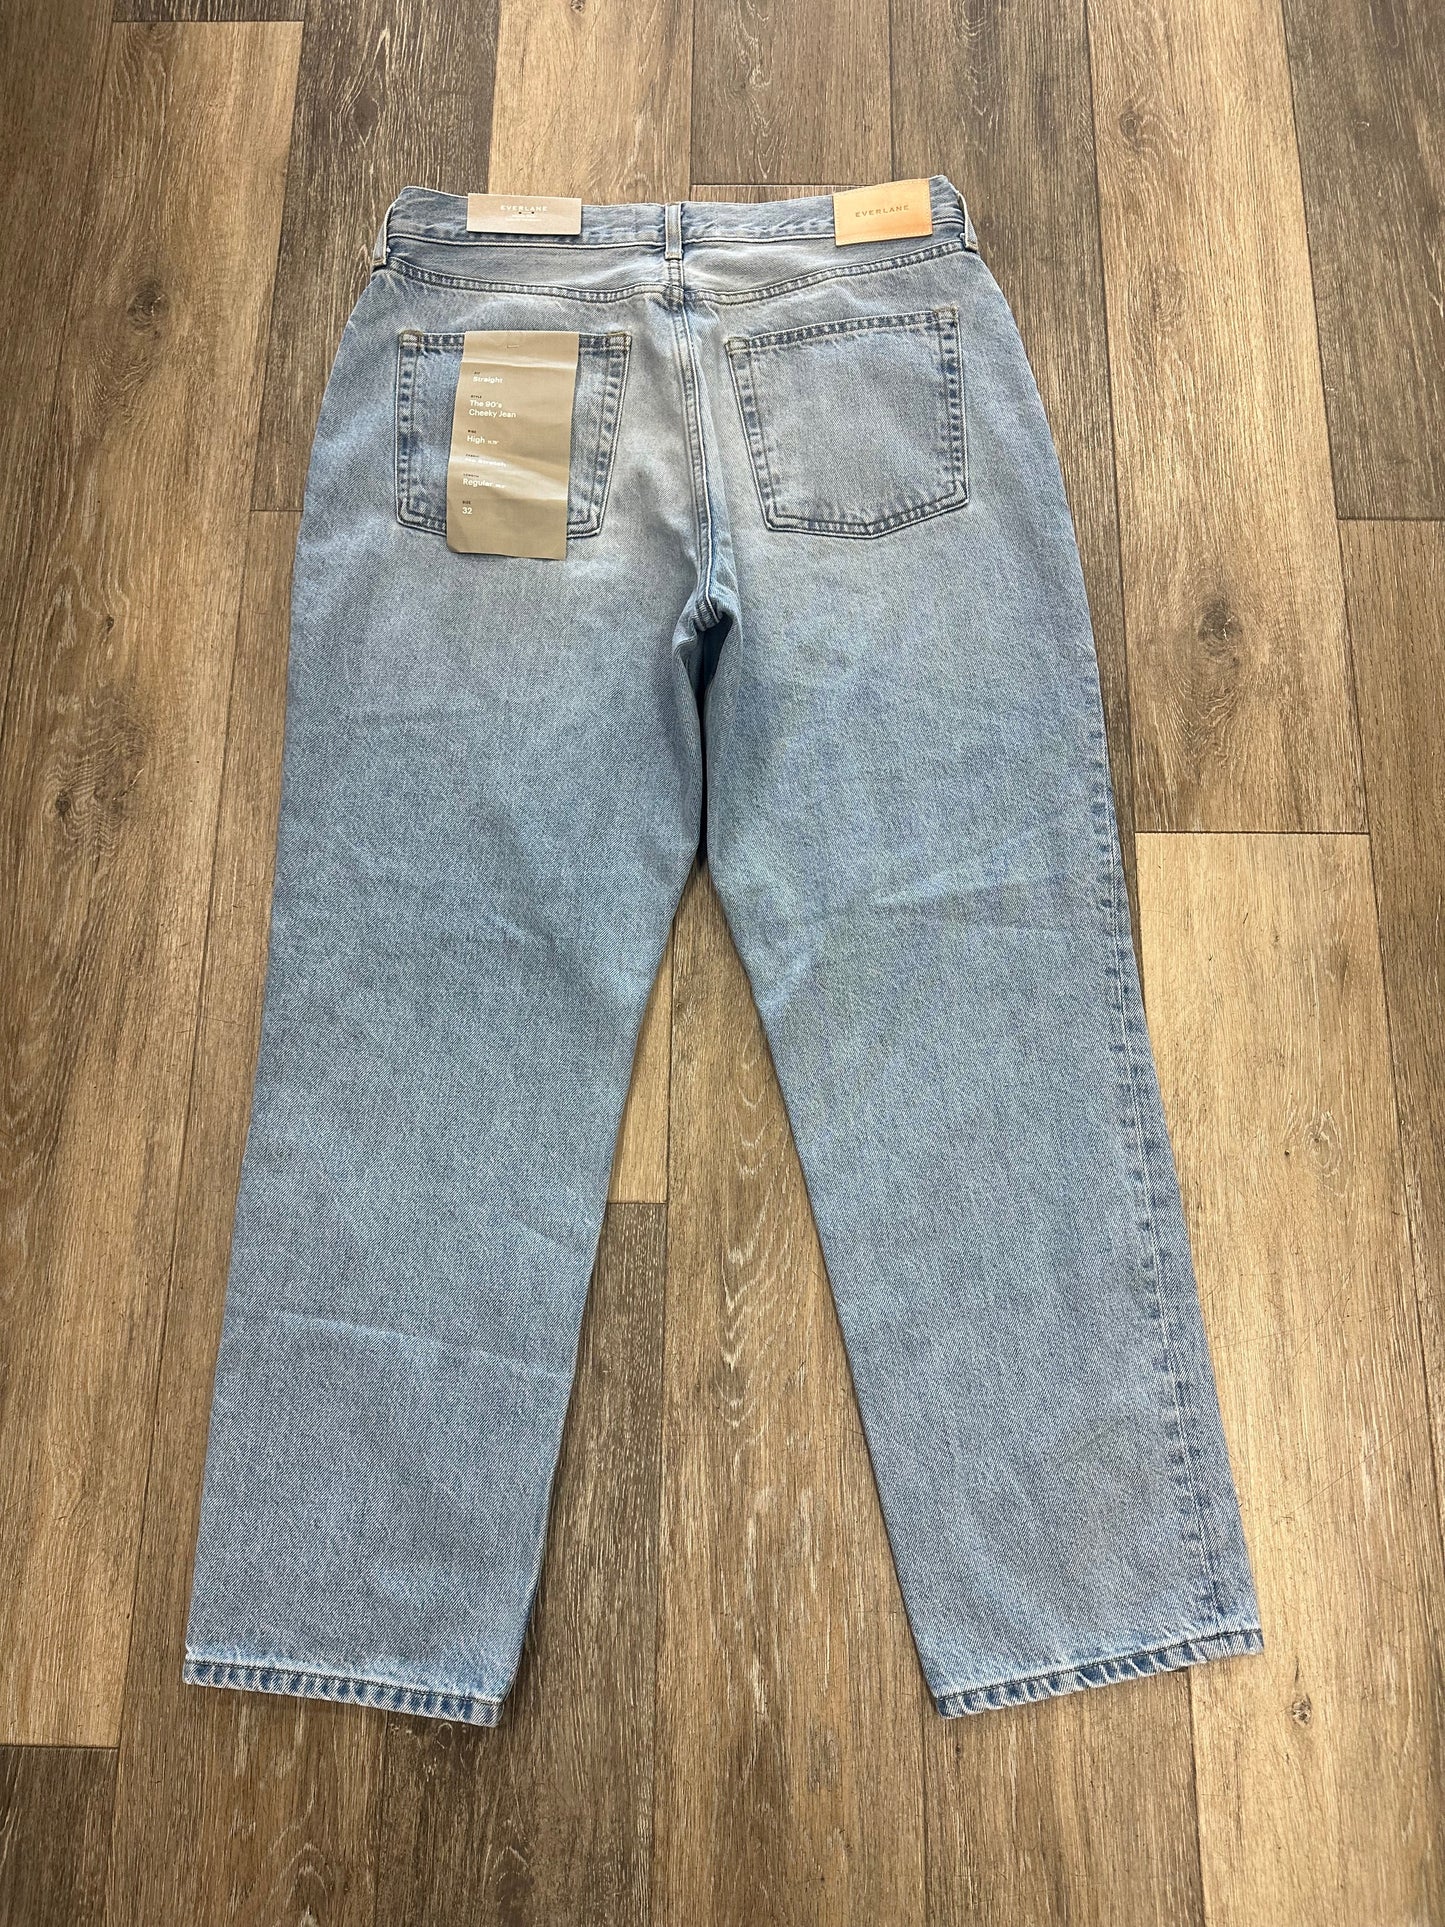 Jeans Straight By Everlane  Size: 14